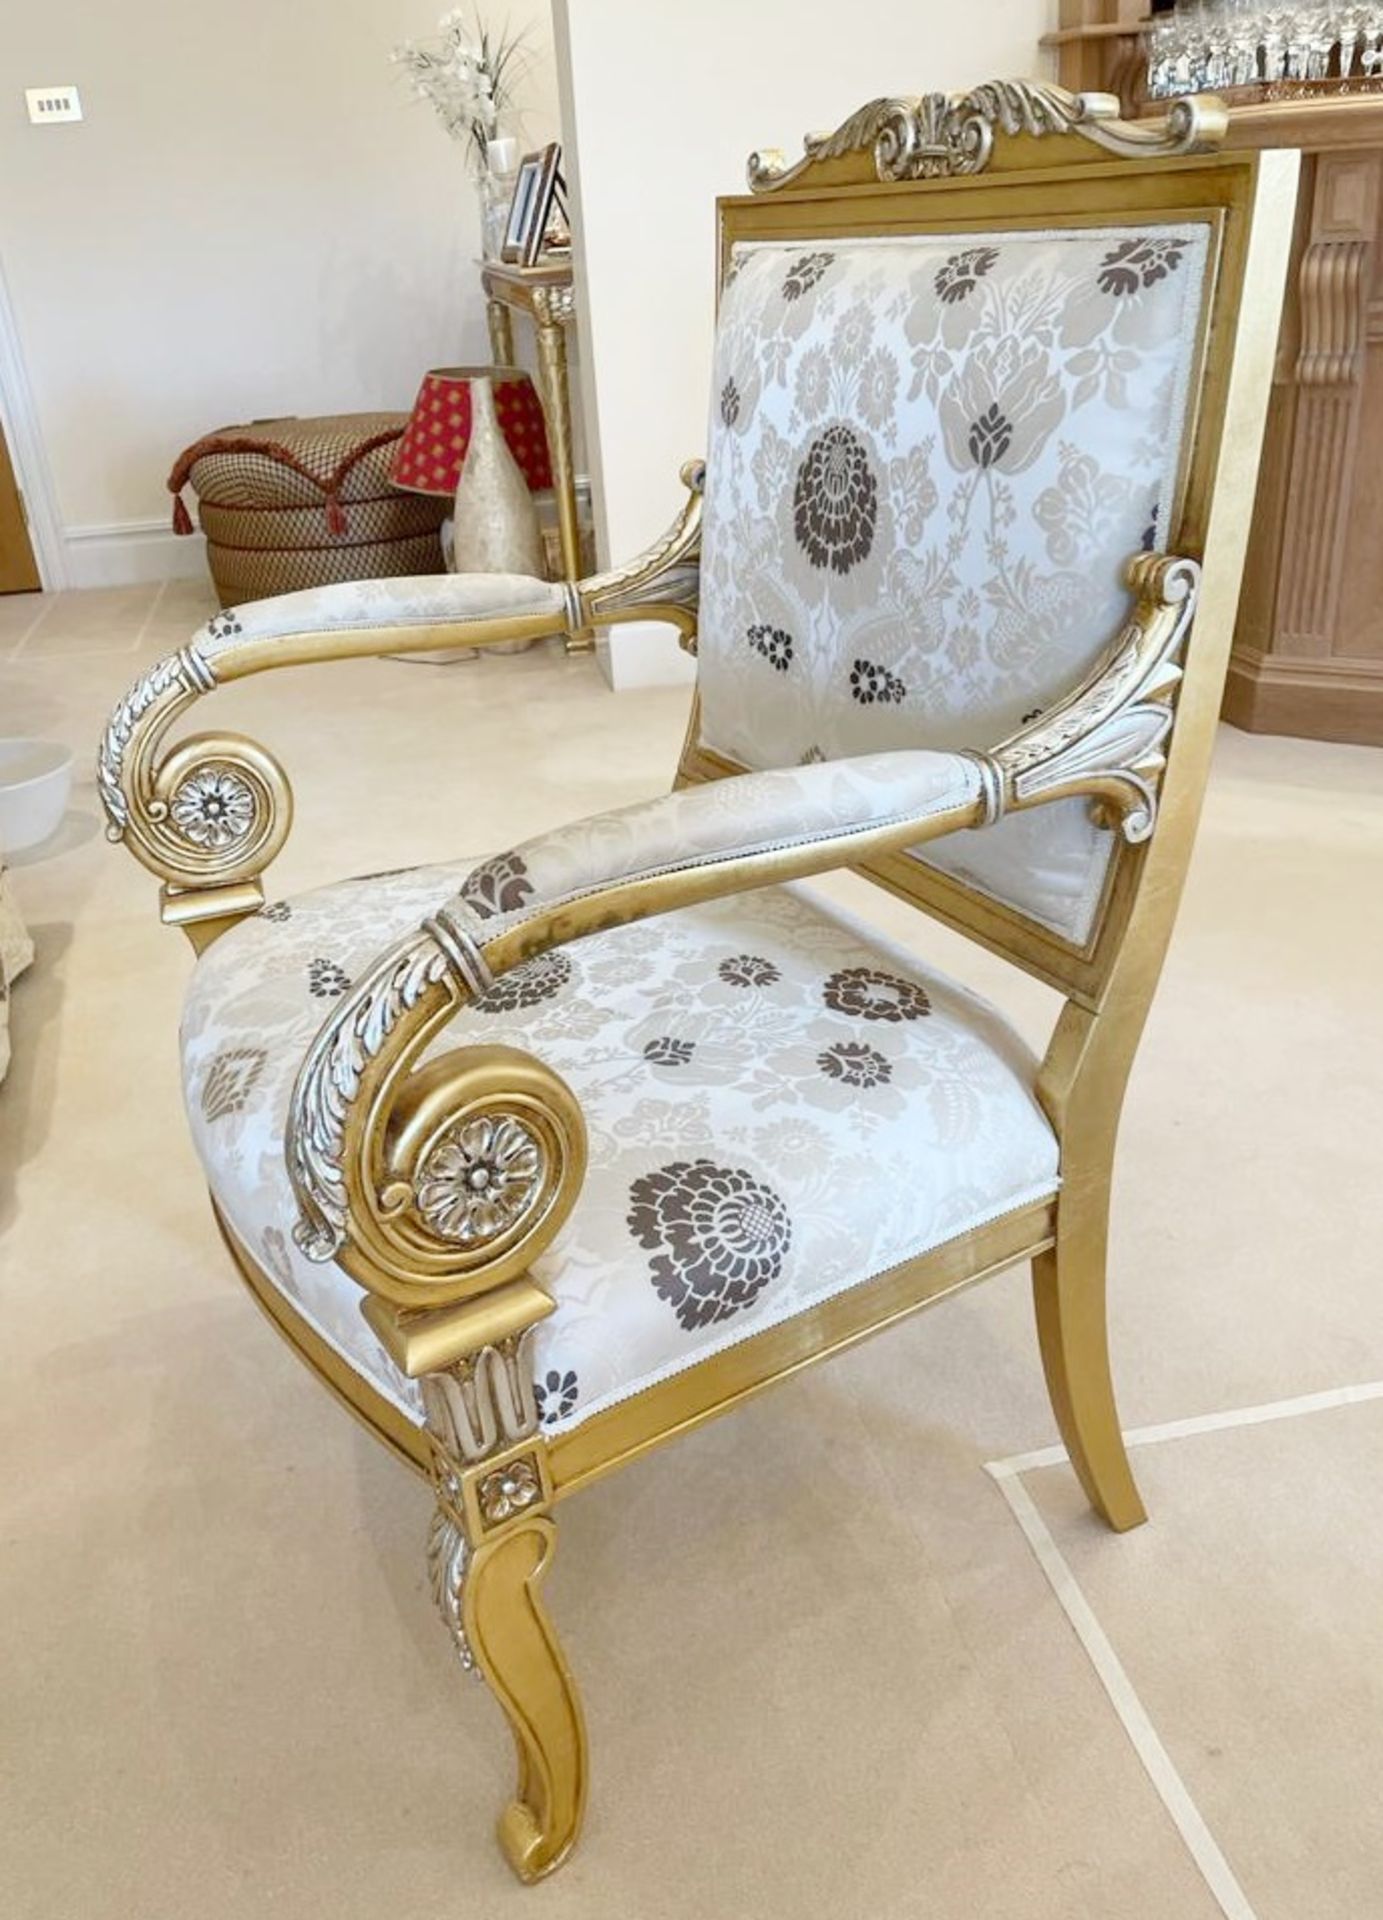 Pair of Scroll Arm Side Chair With Beautiful Carving and Bespoke Upholstery - Size: H105/46 x W75  x - Image 17 of 25